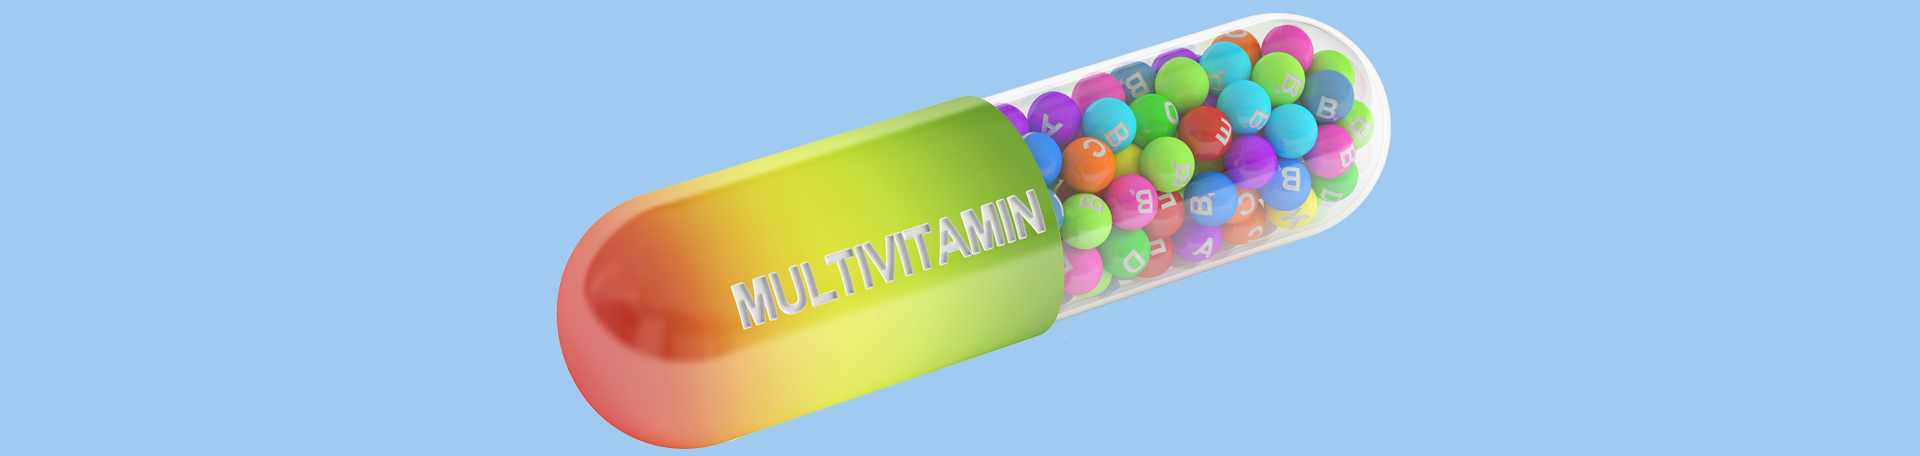 Easley multivitamin picture to show off benefits for memory and cognition